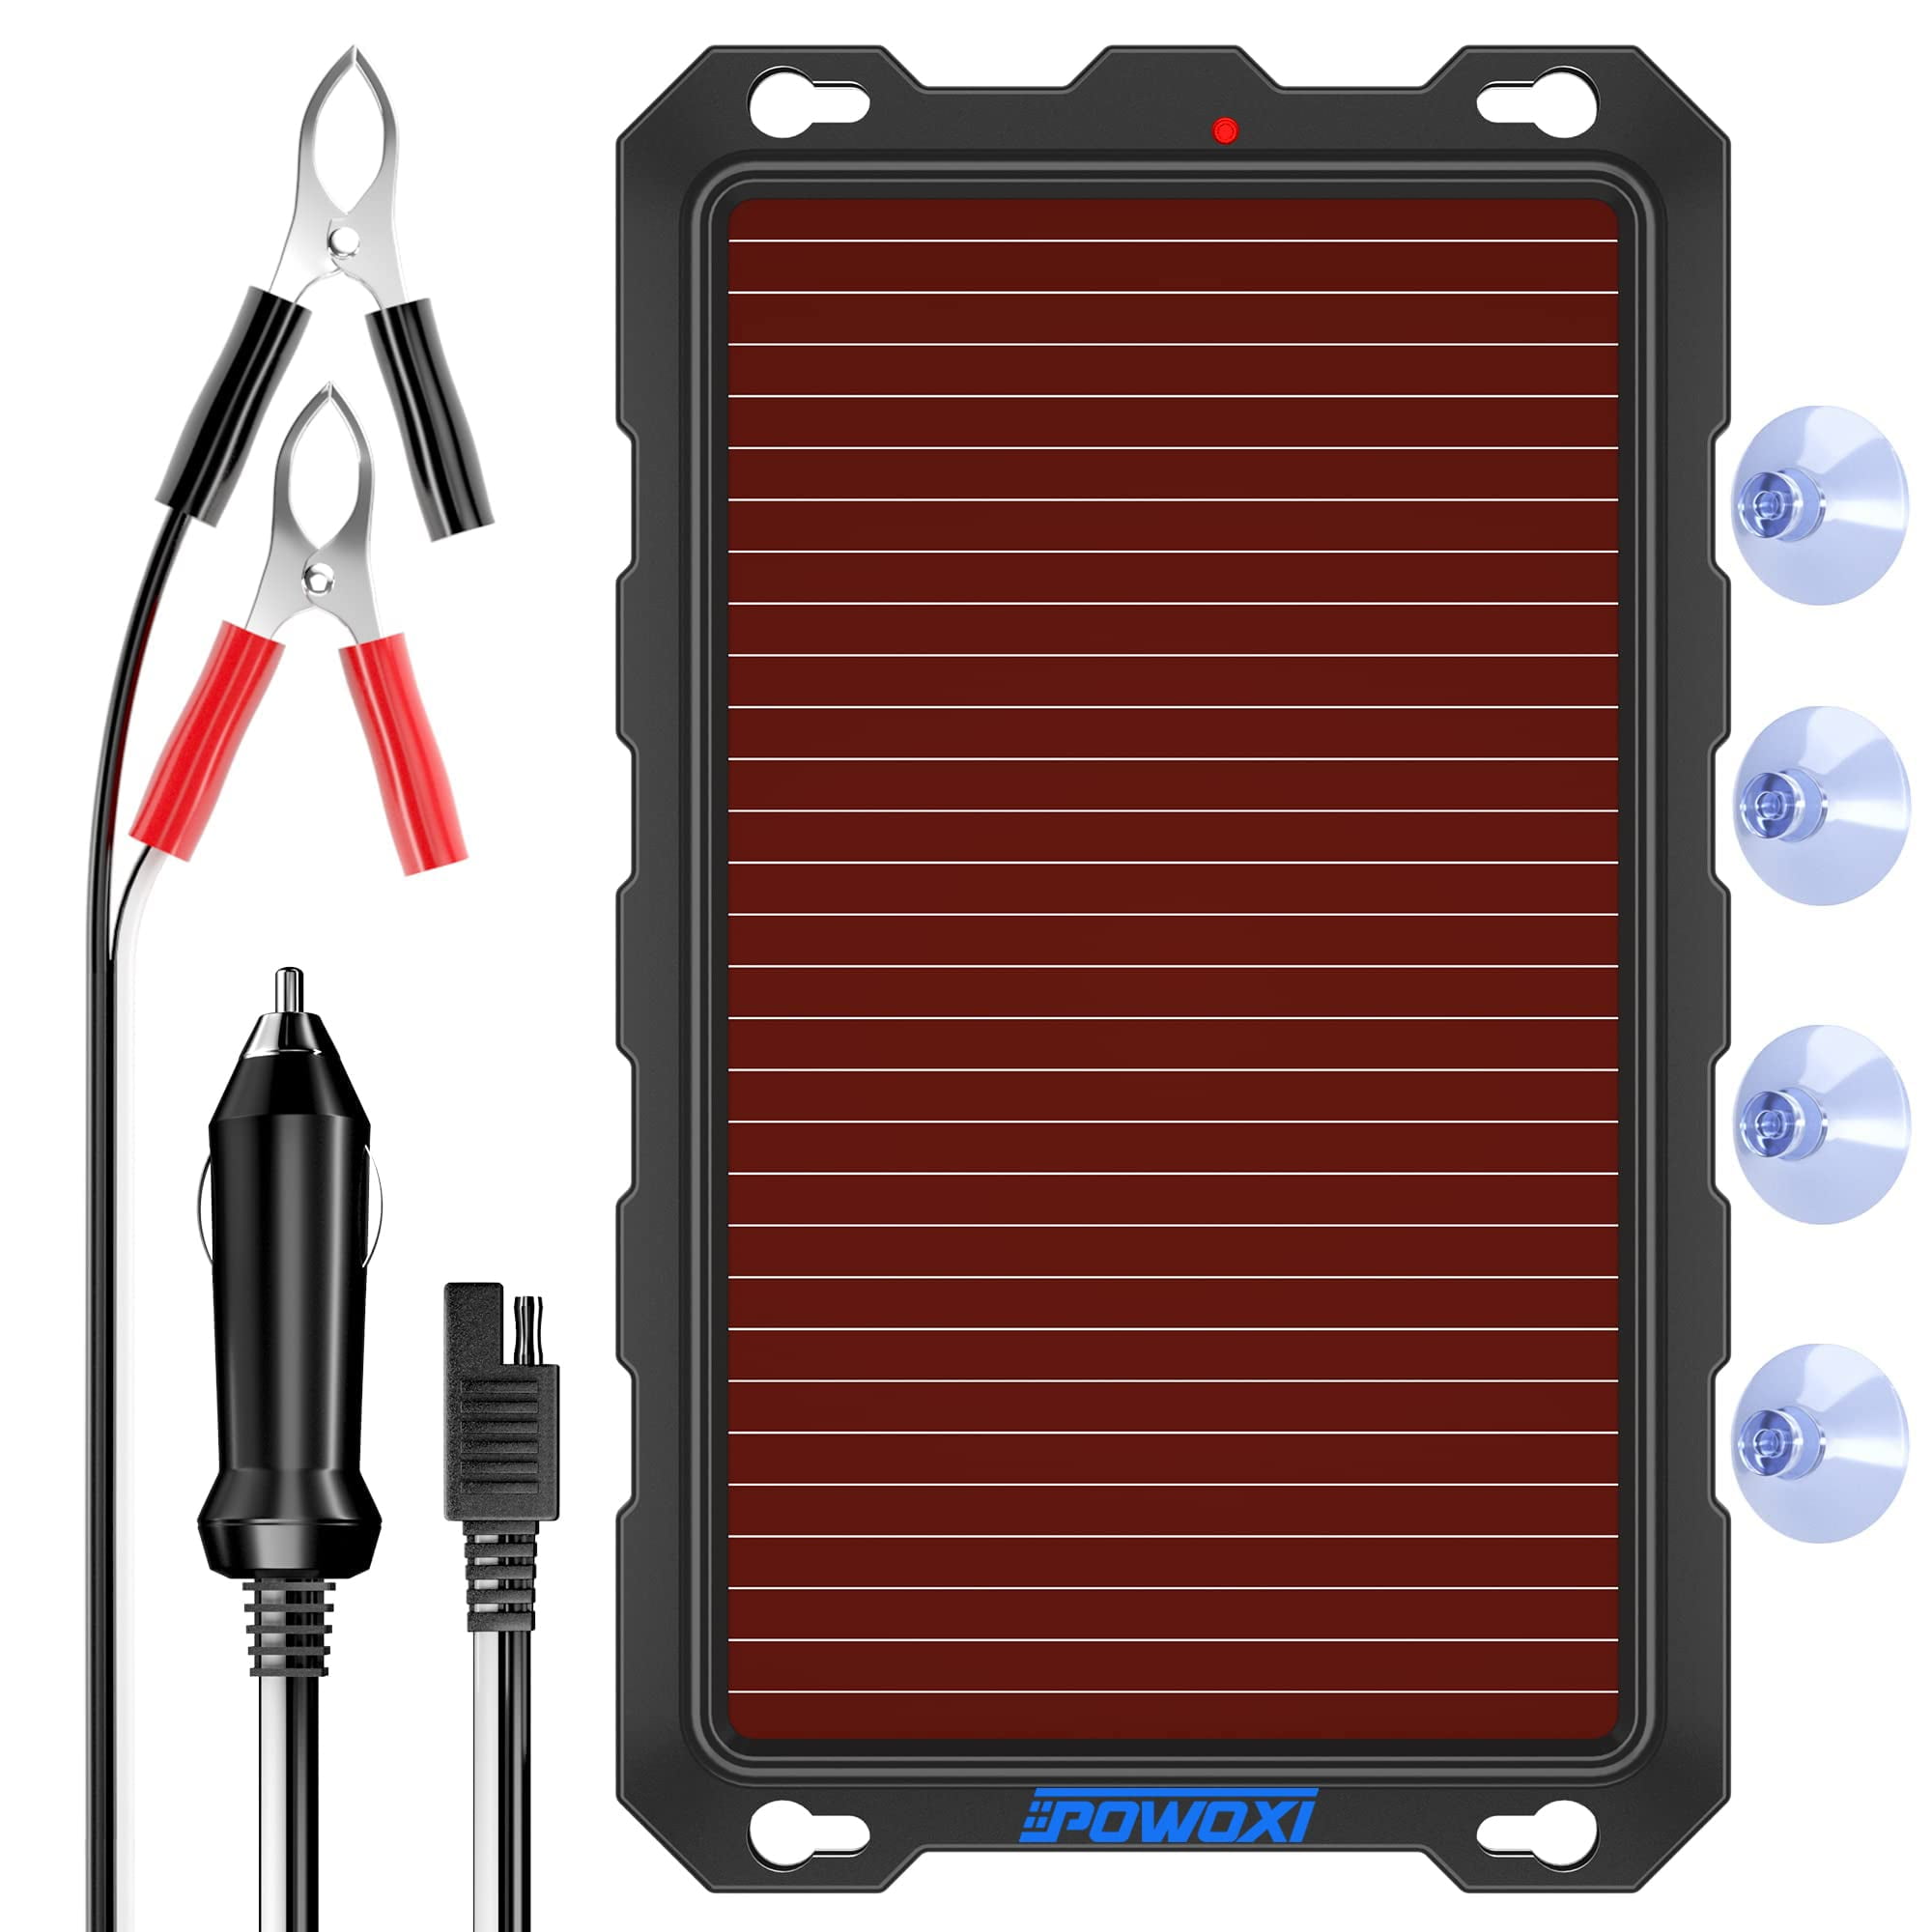 Upgraded 7.5W-Solar-Battery-Trickle-Charger-Maintainer-12V Portable  Waterproof Solar Panel Trickle Charging Kit for Car, Automotive,  Motorcycle, Boat, Marine, RV,Trailer,Powersports, Snowmobile, etc. 